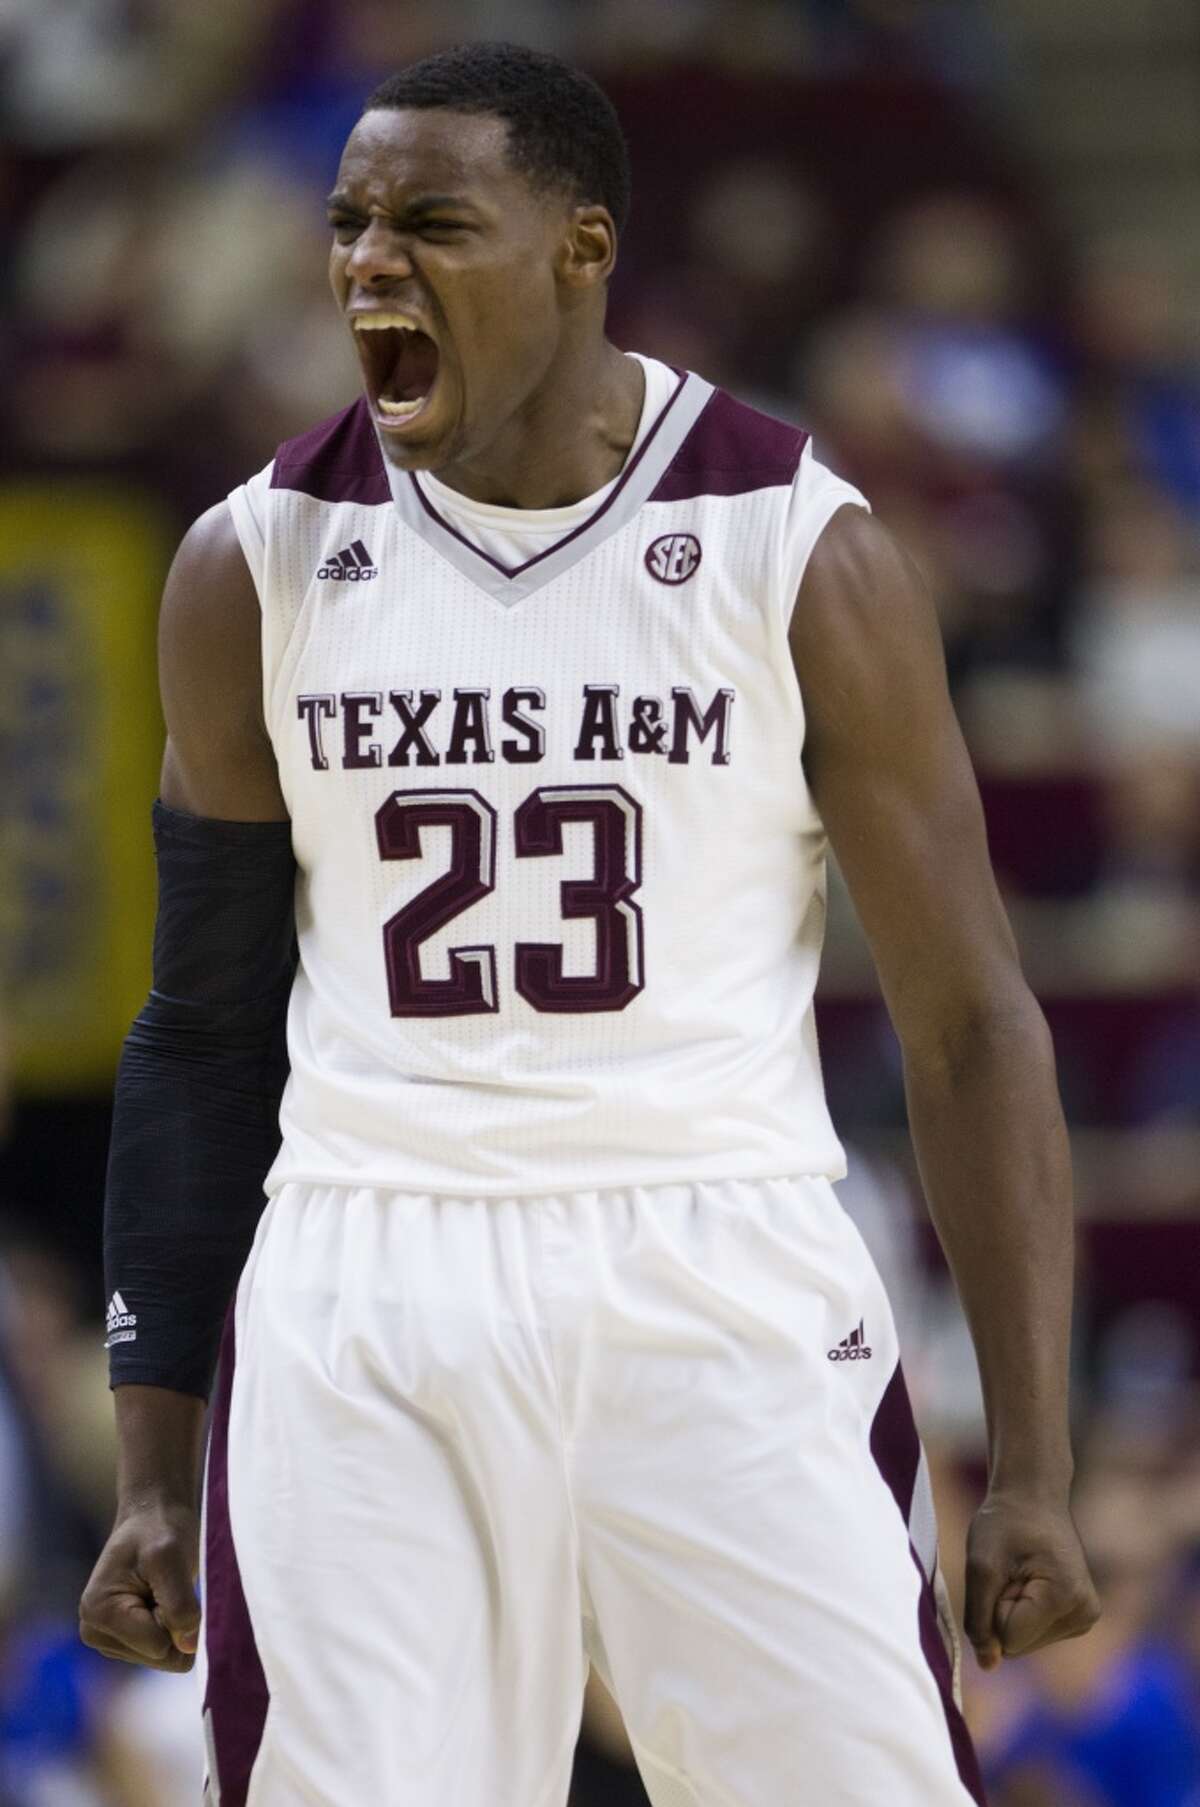 Texas A&M guard Danuel House (23) reacts to a play during the first half of a college basketball game against Kentucky at Reed Arena on Saturday, Jan. 10, 2015, in College Station. ( Brett Coomer / Houston Chronicle )